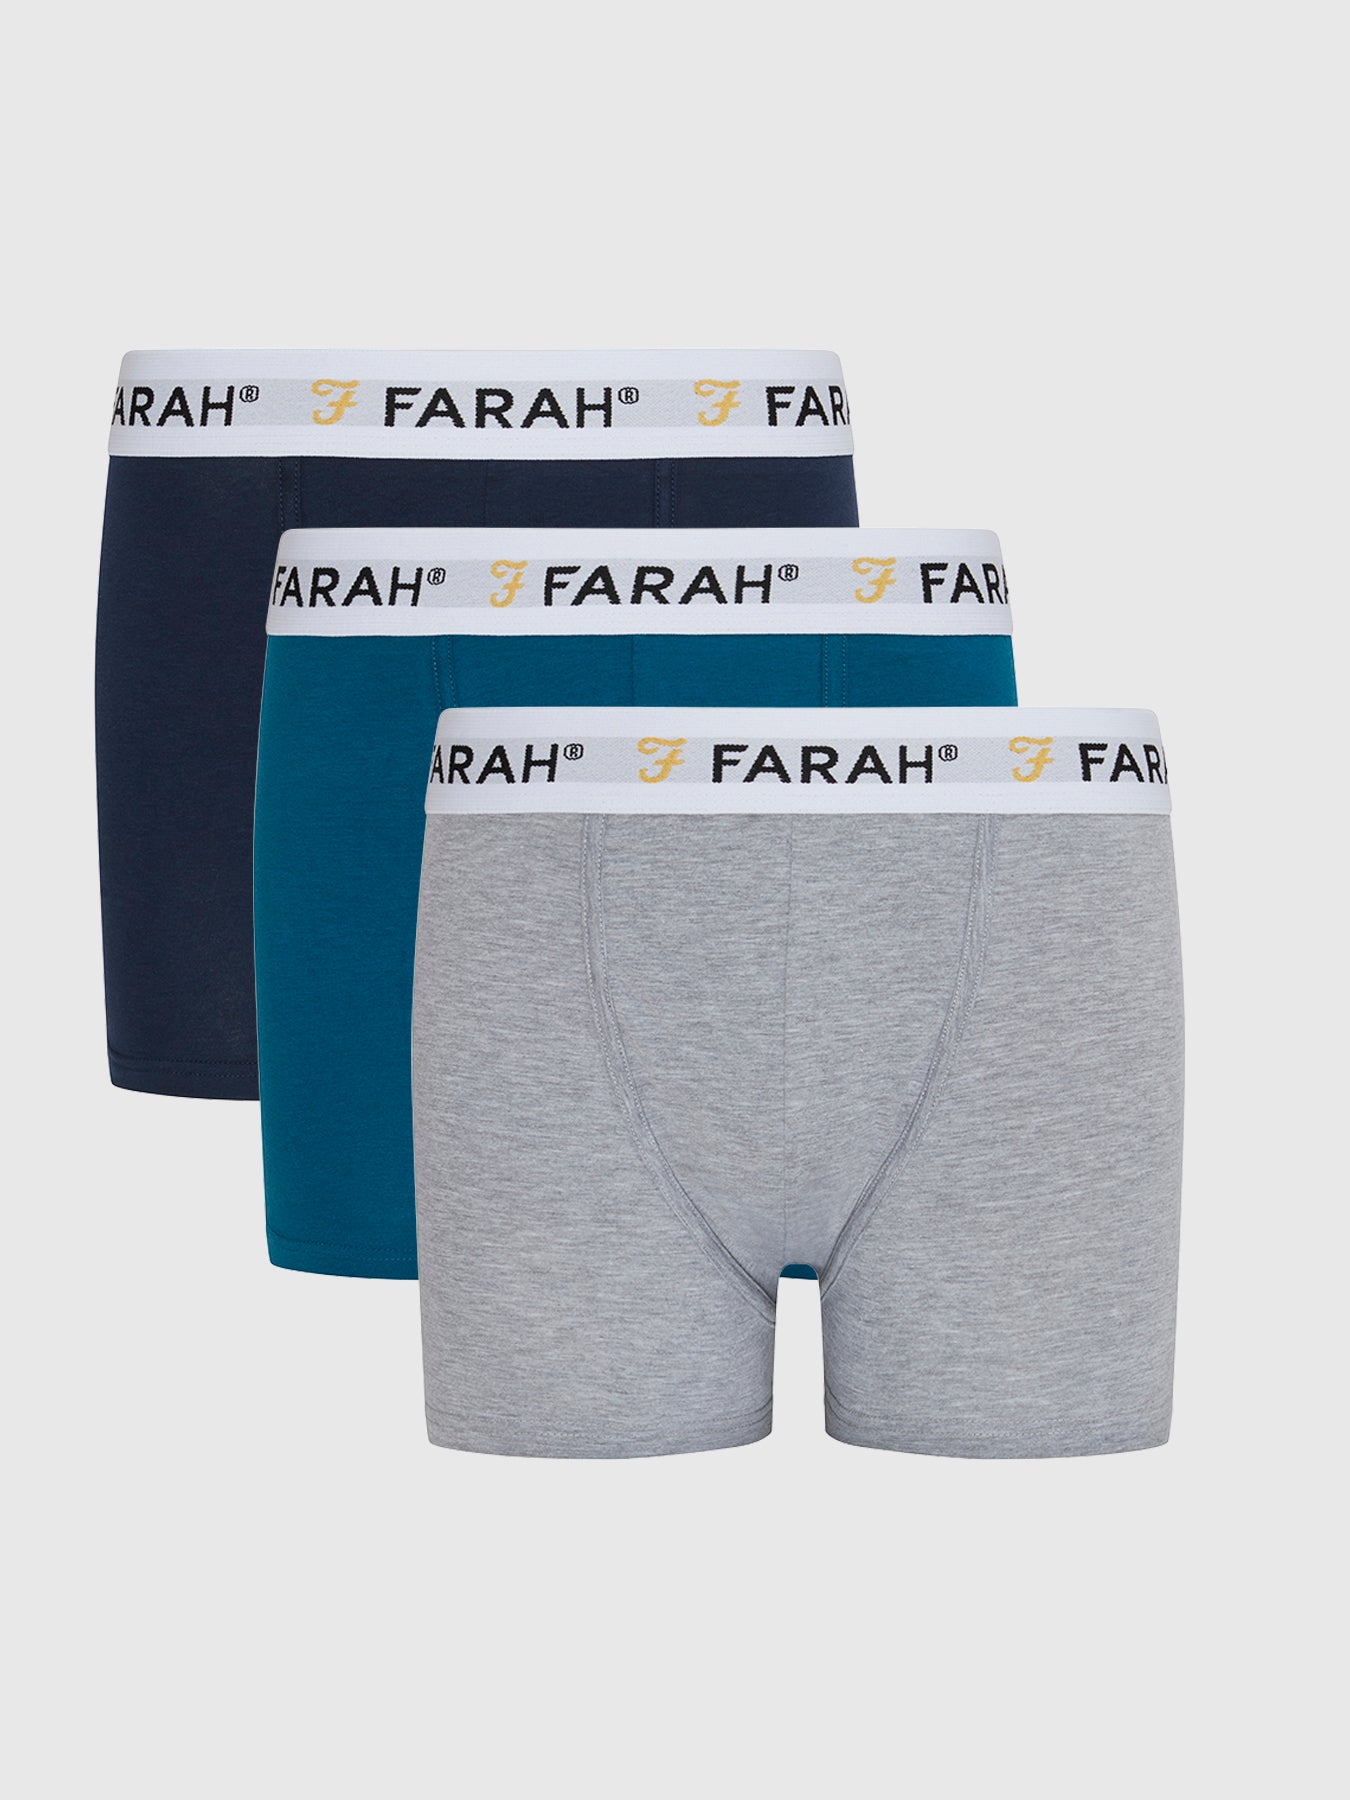 View 3 Pack Kadel Boxers In Assorted Colour information